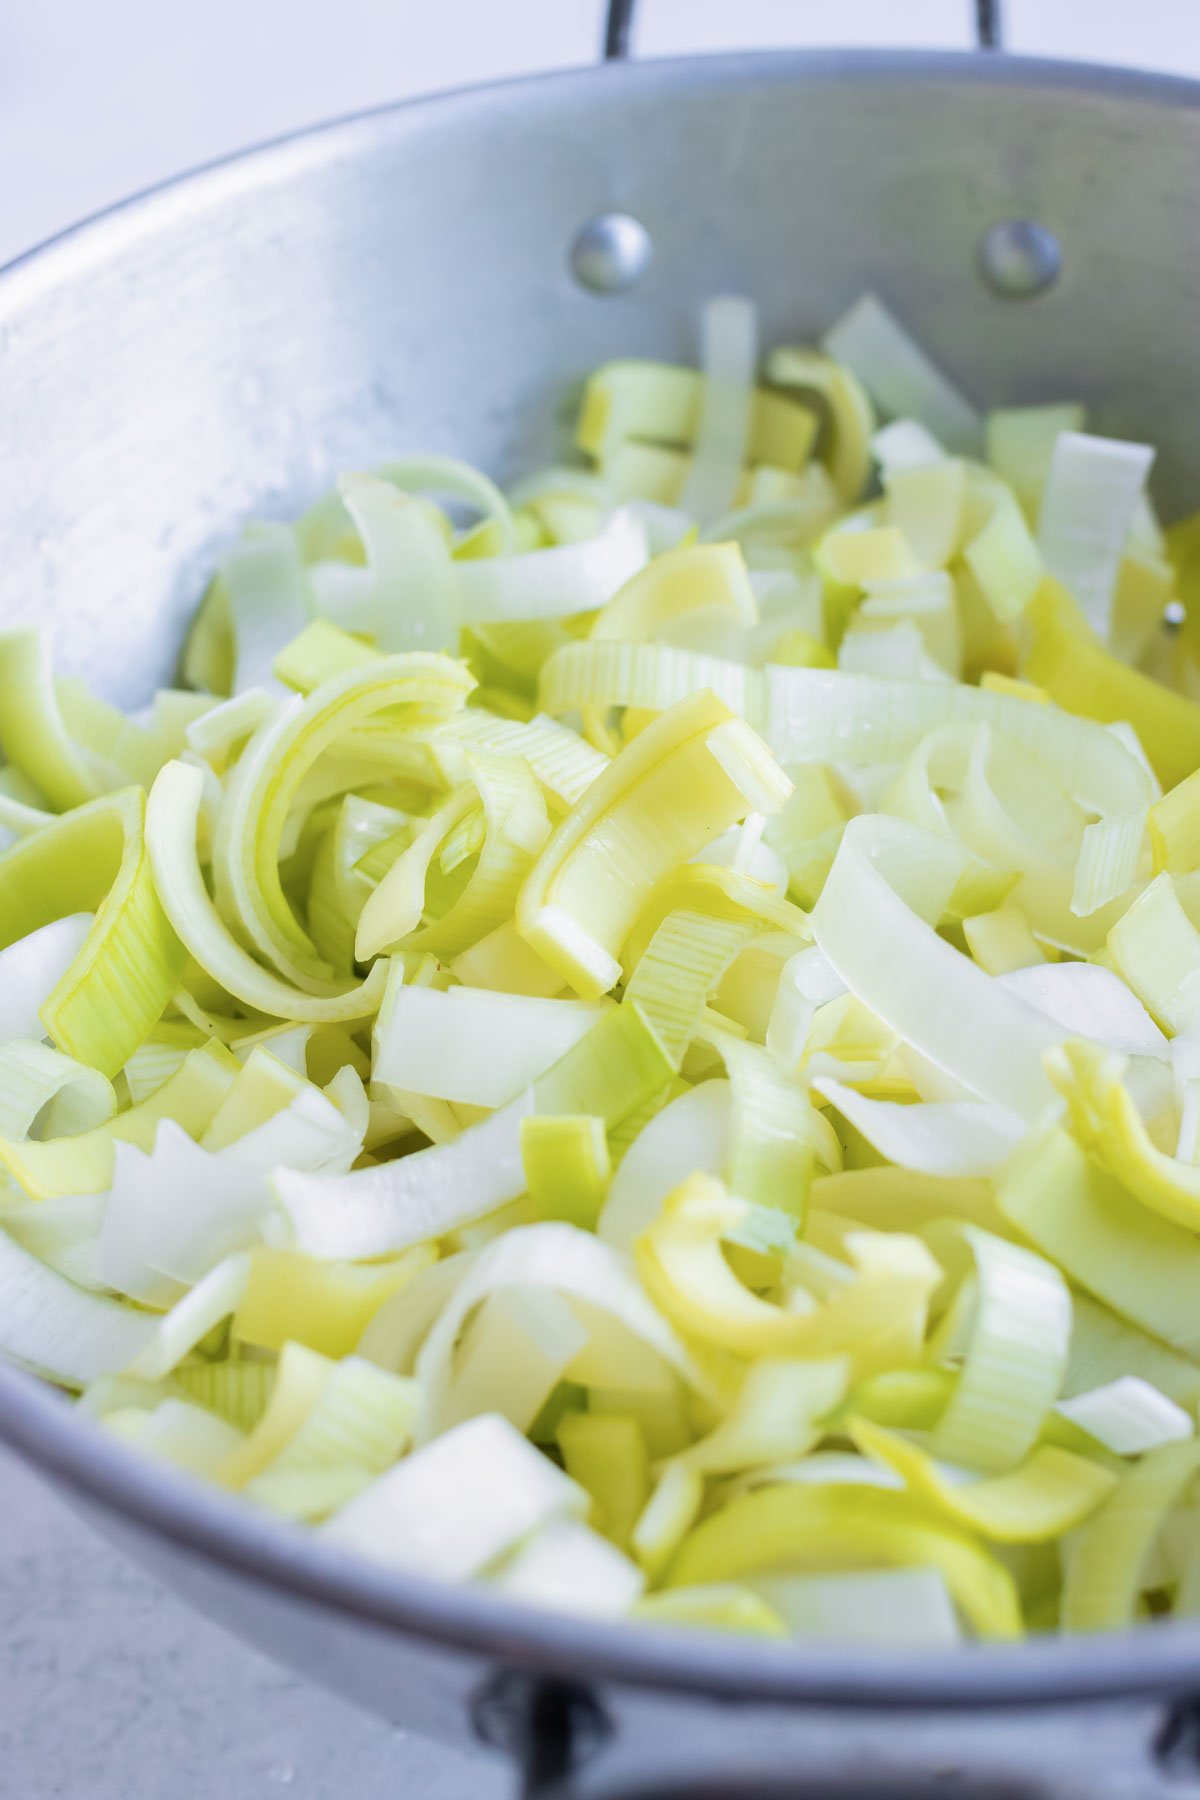 A colander full of thinly sliced and cleaned leeks.